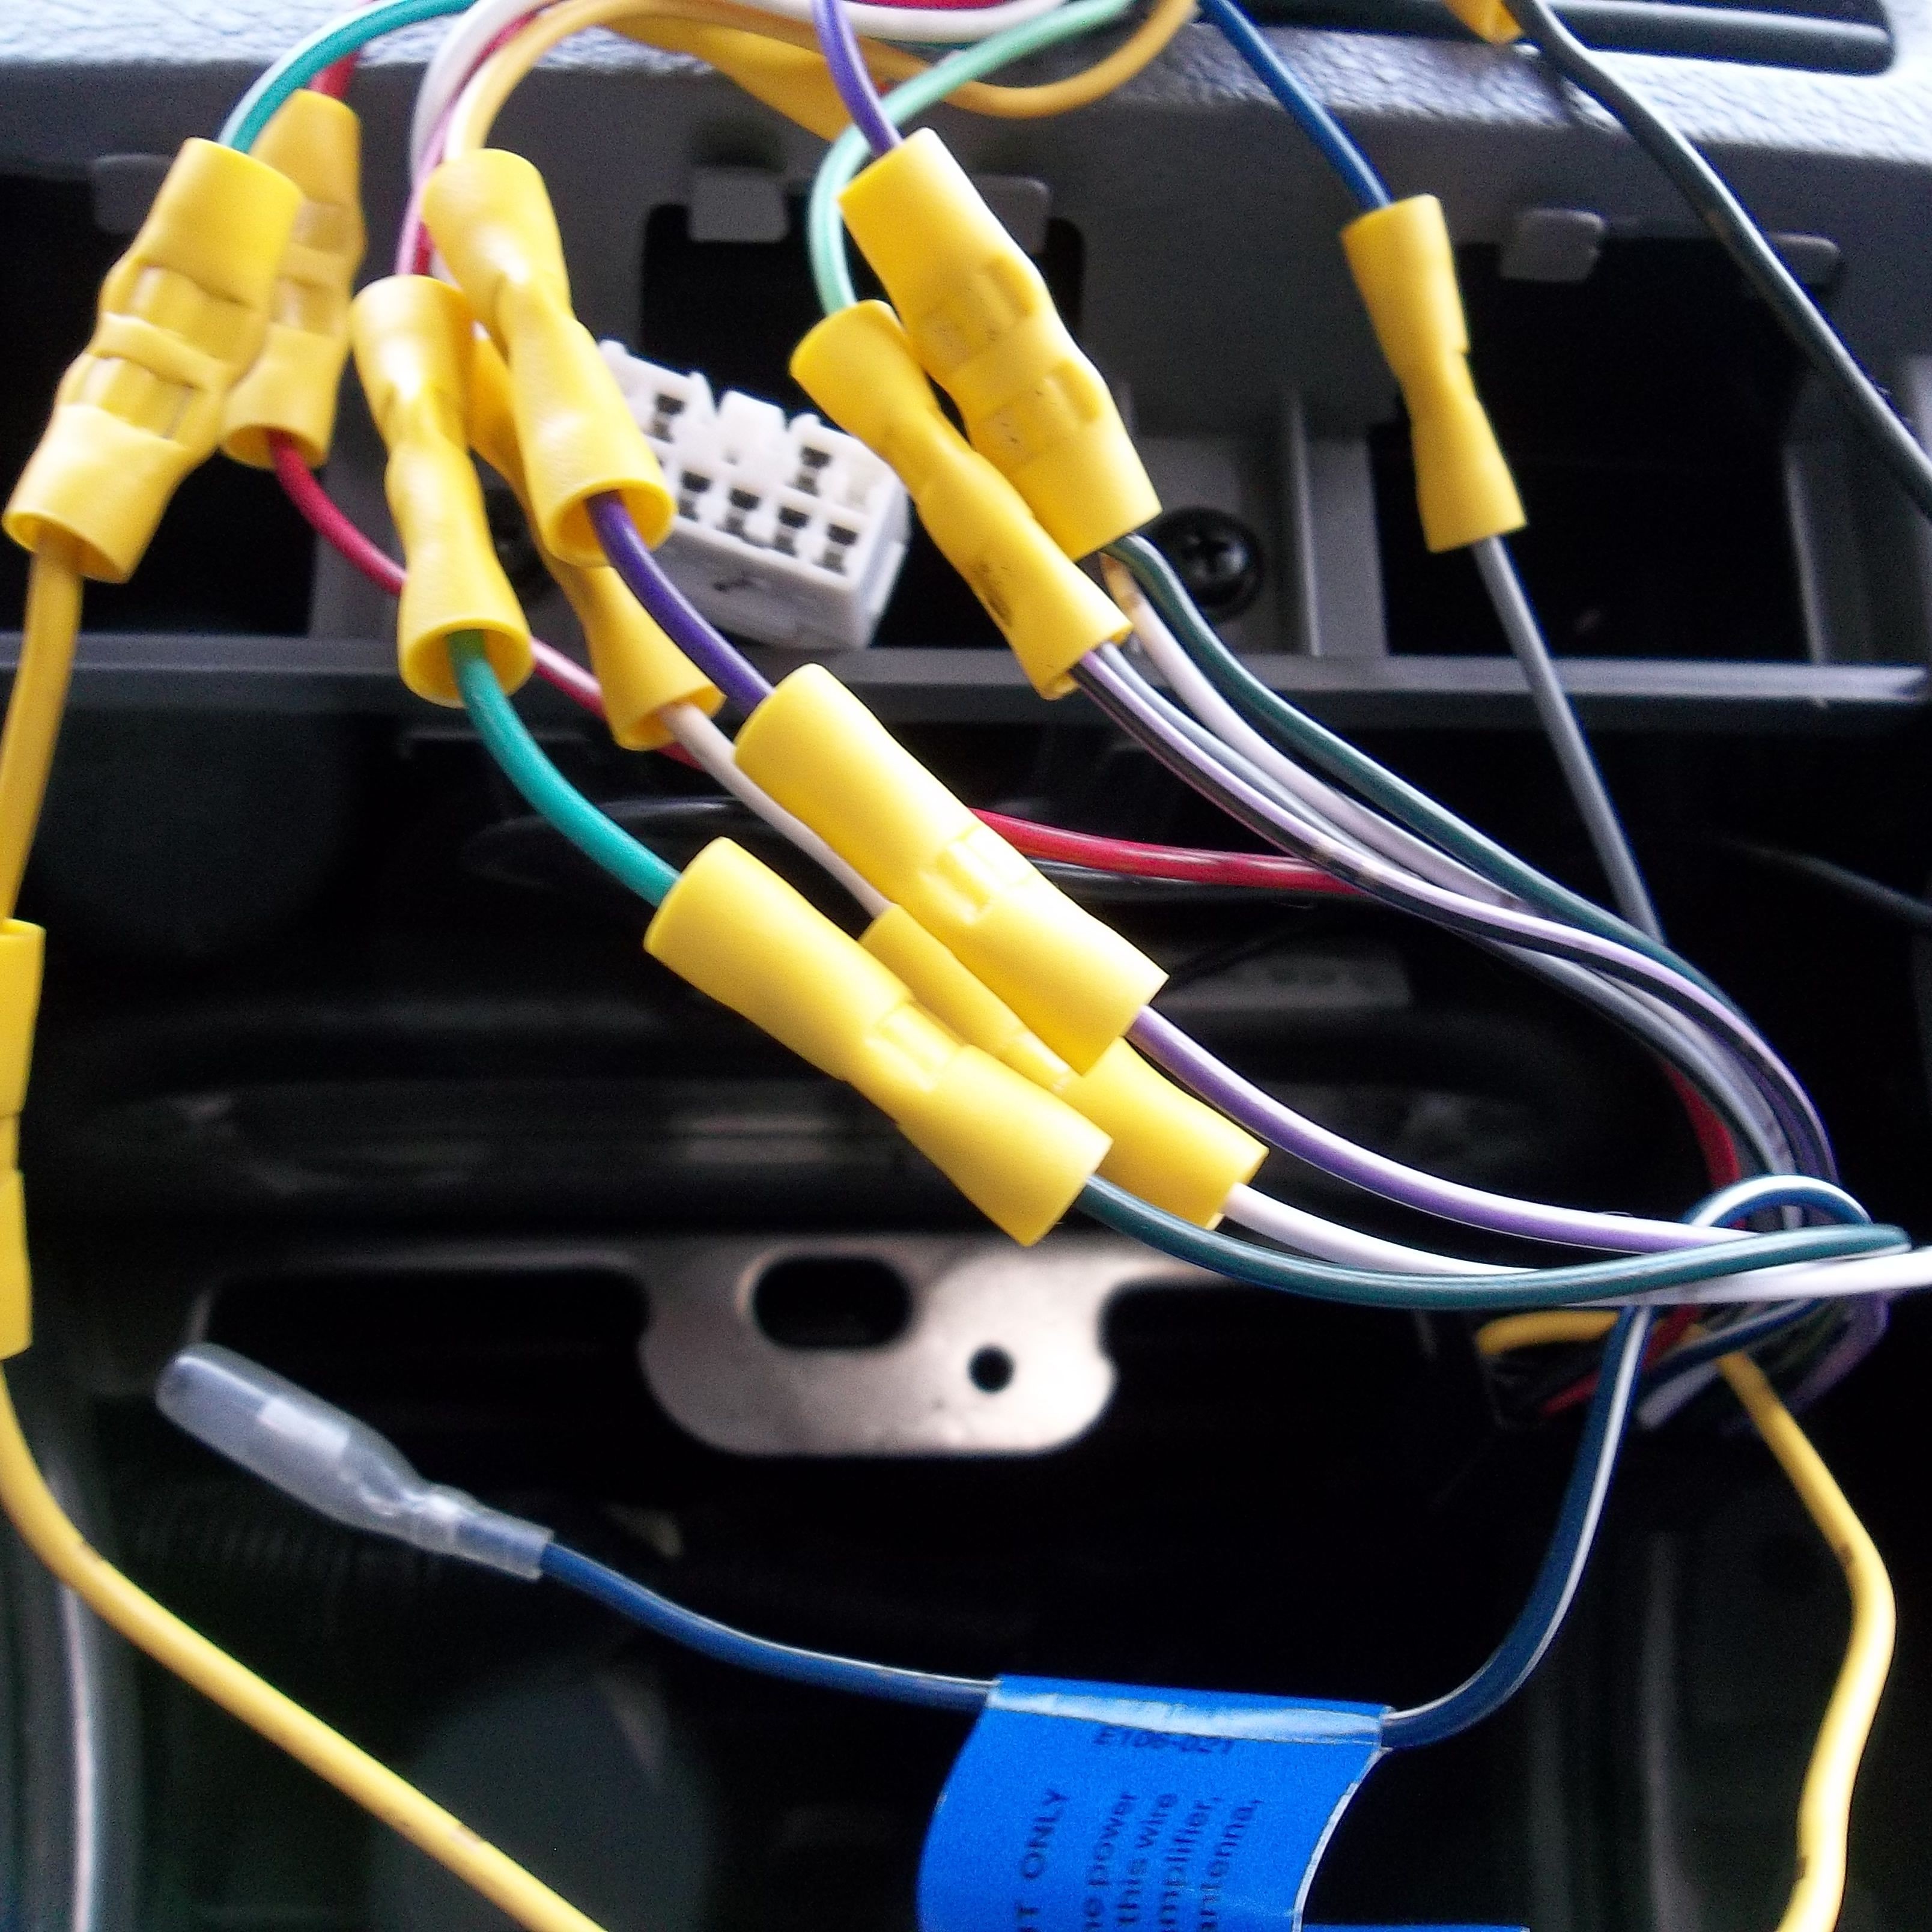 Car Amp Installation Diagram What You Need to Know About Car Amp Wiring Of Car Amp Installation Diagram